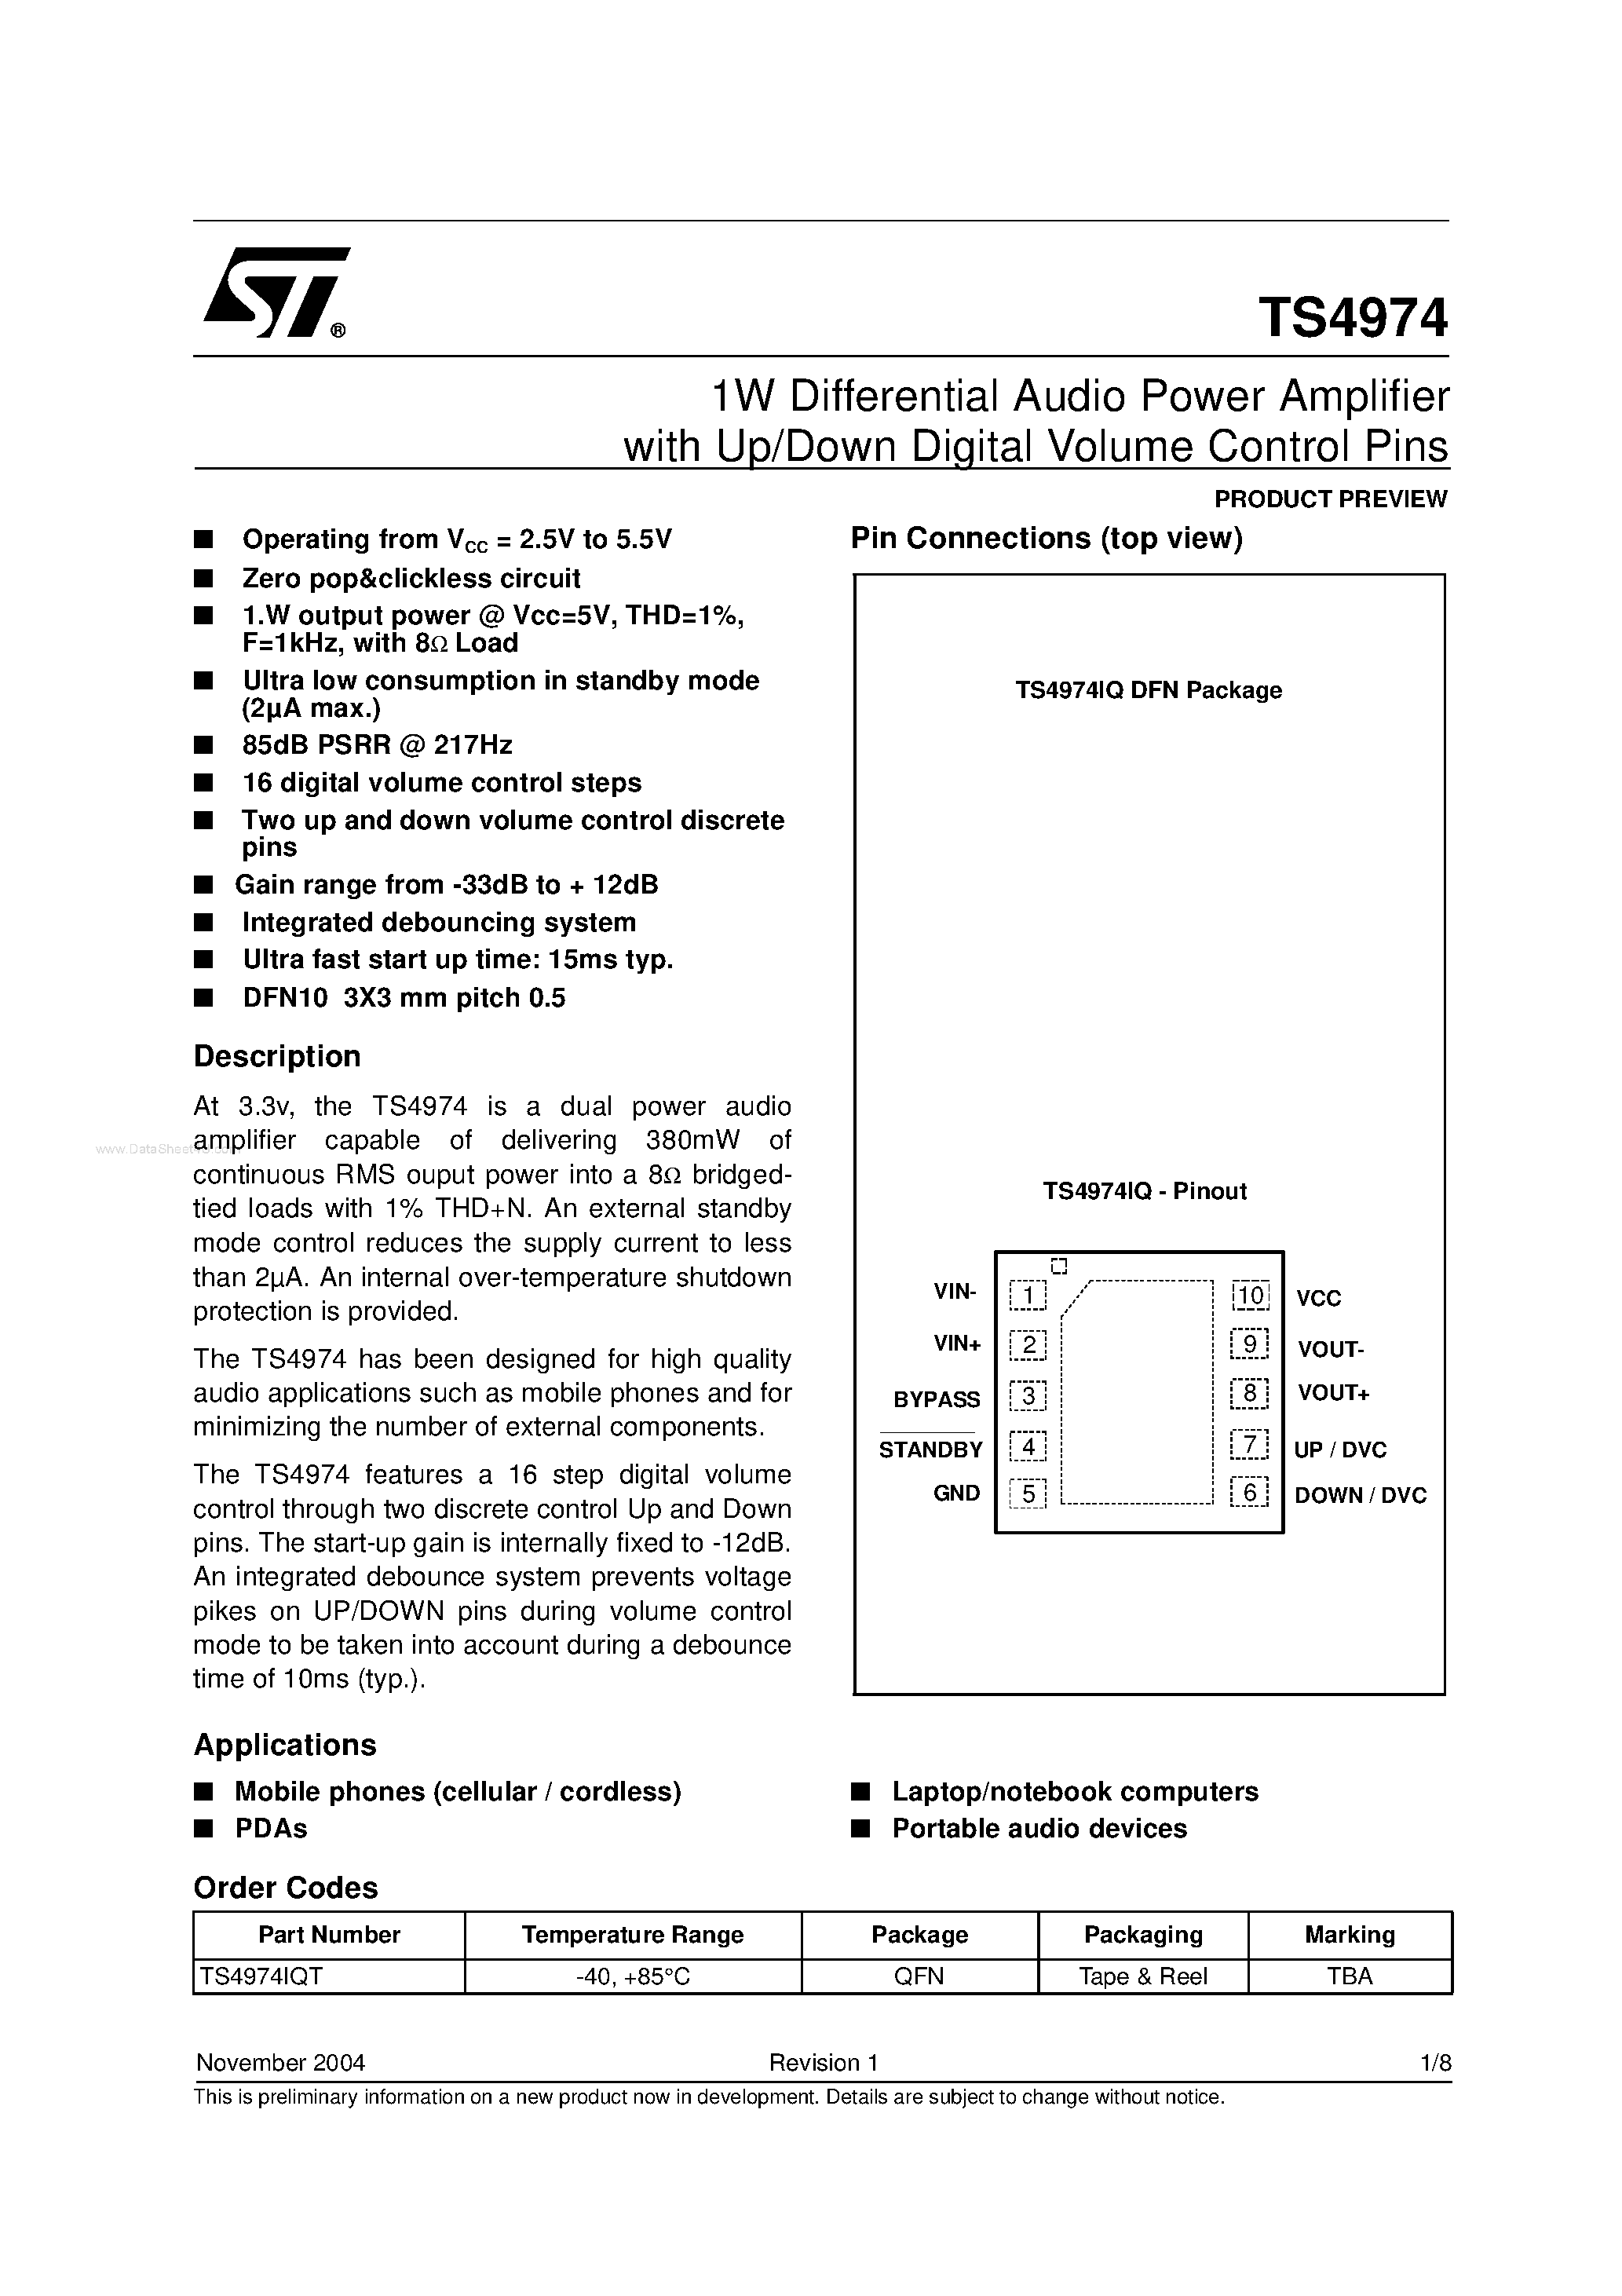 Datasheet TS4974 - 1W Differential Audio Power Amplifier page 1